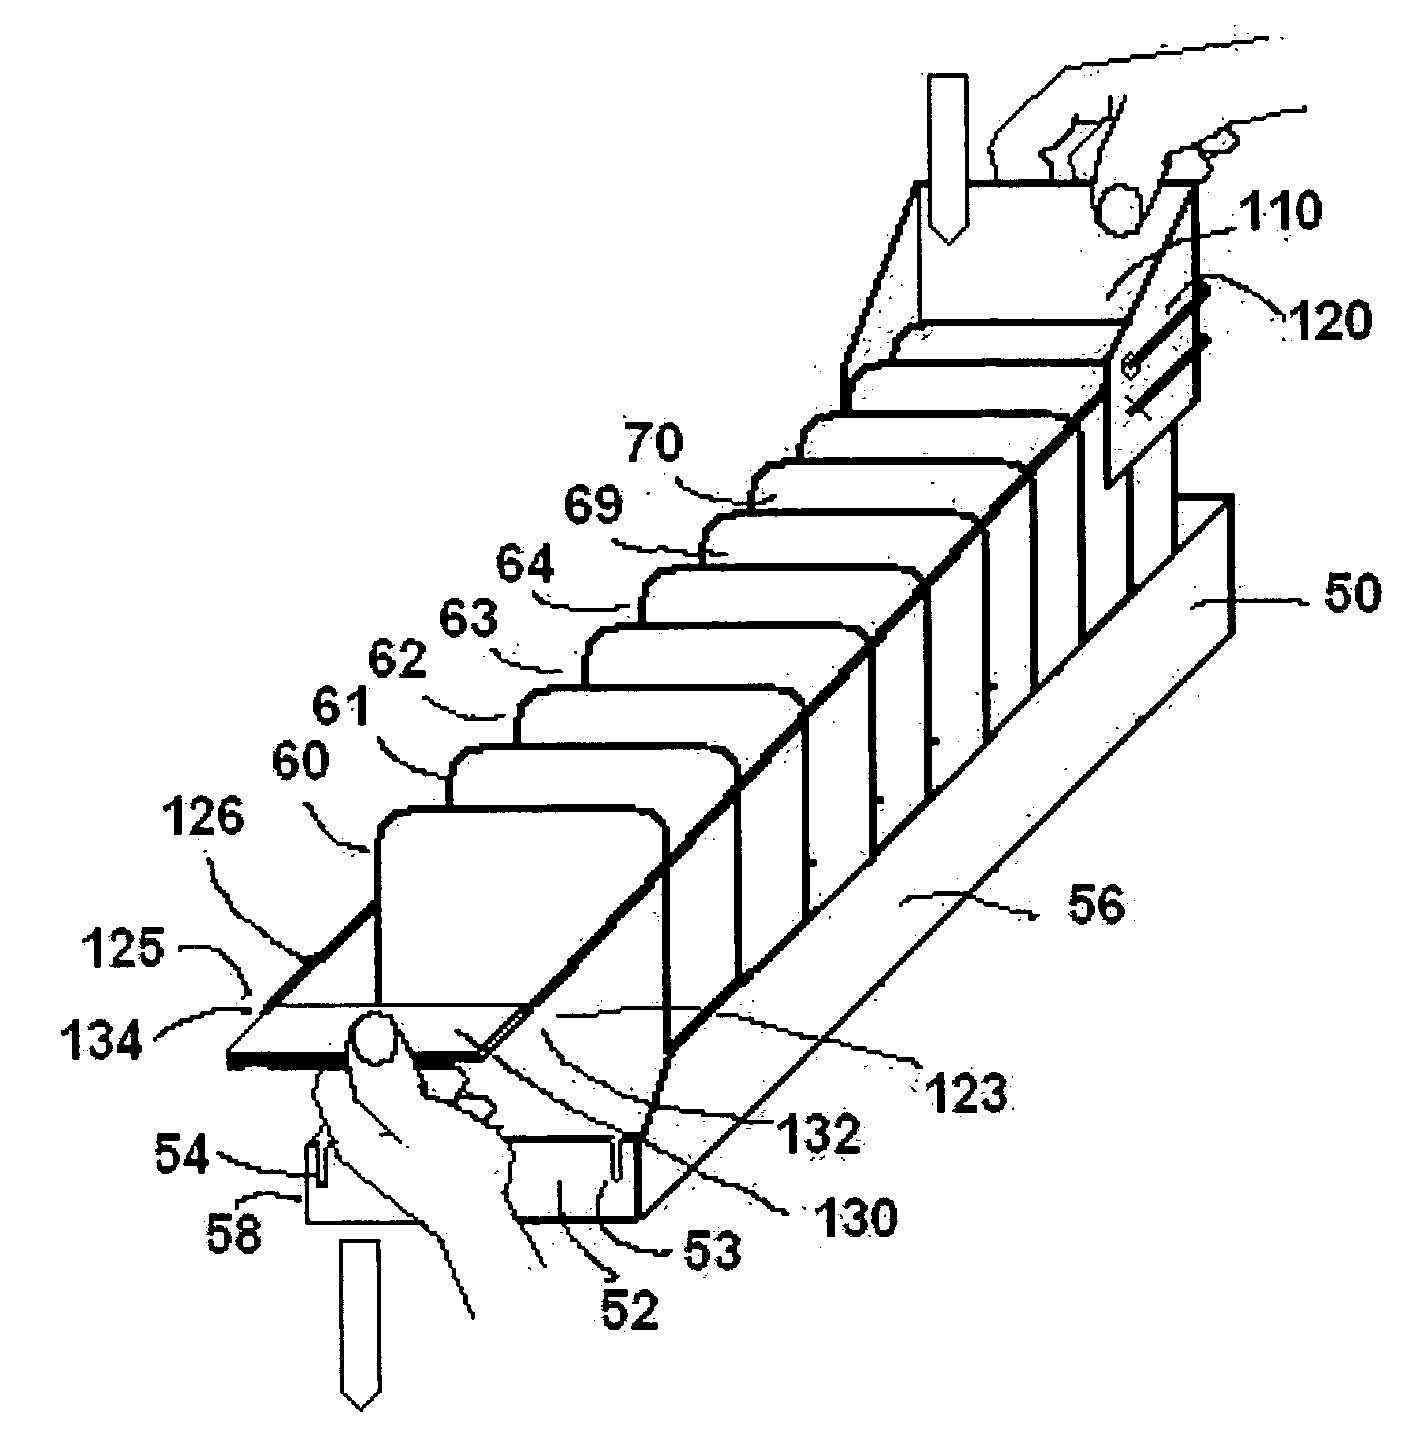 Method and apparatus for in-carton display and fronting of merchandise items